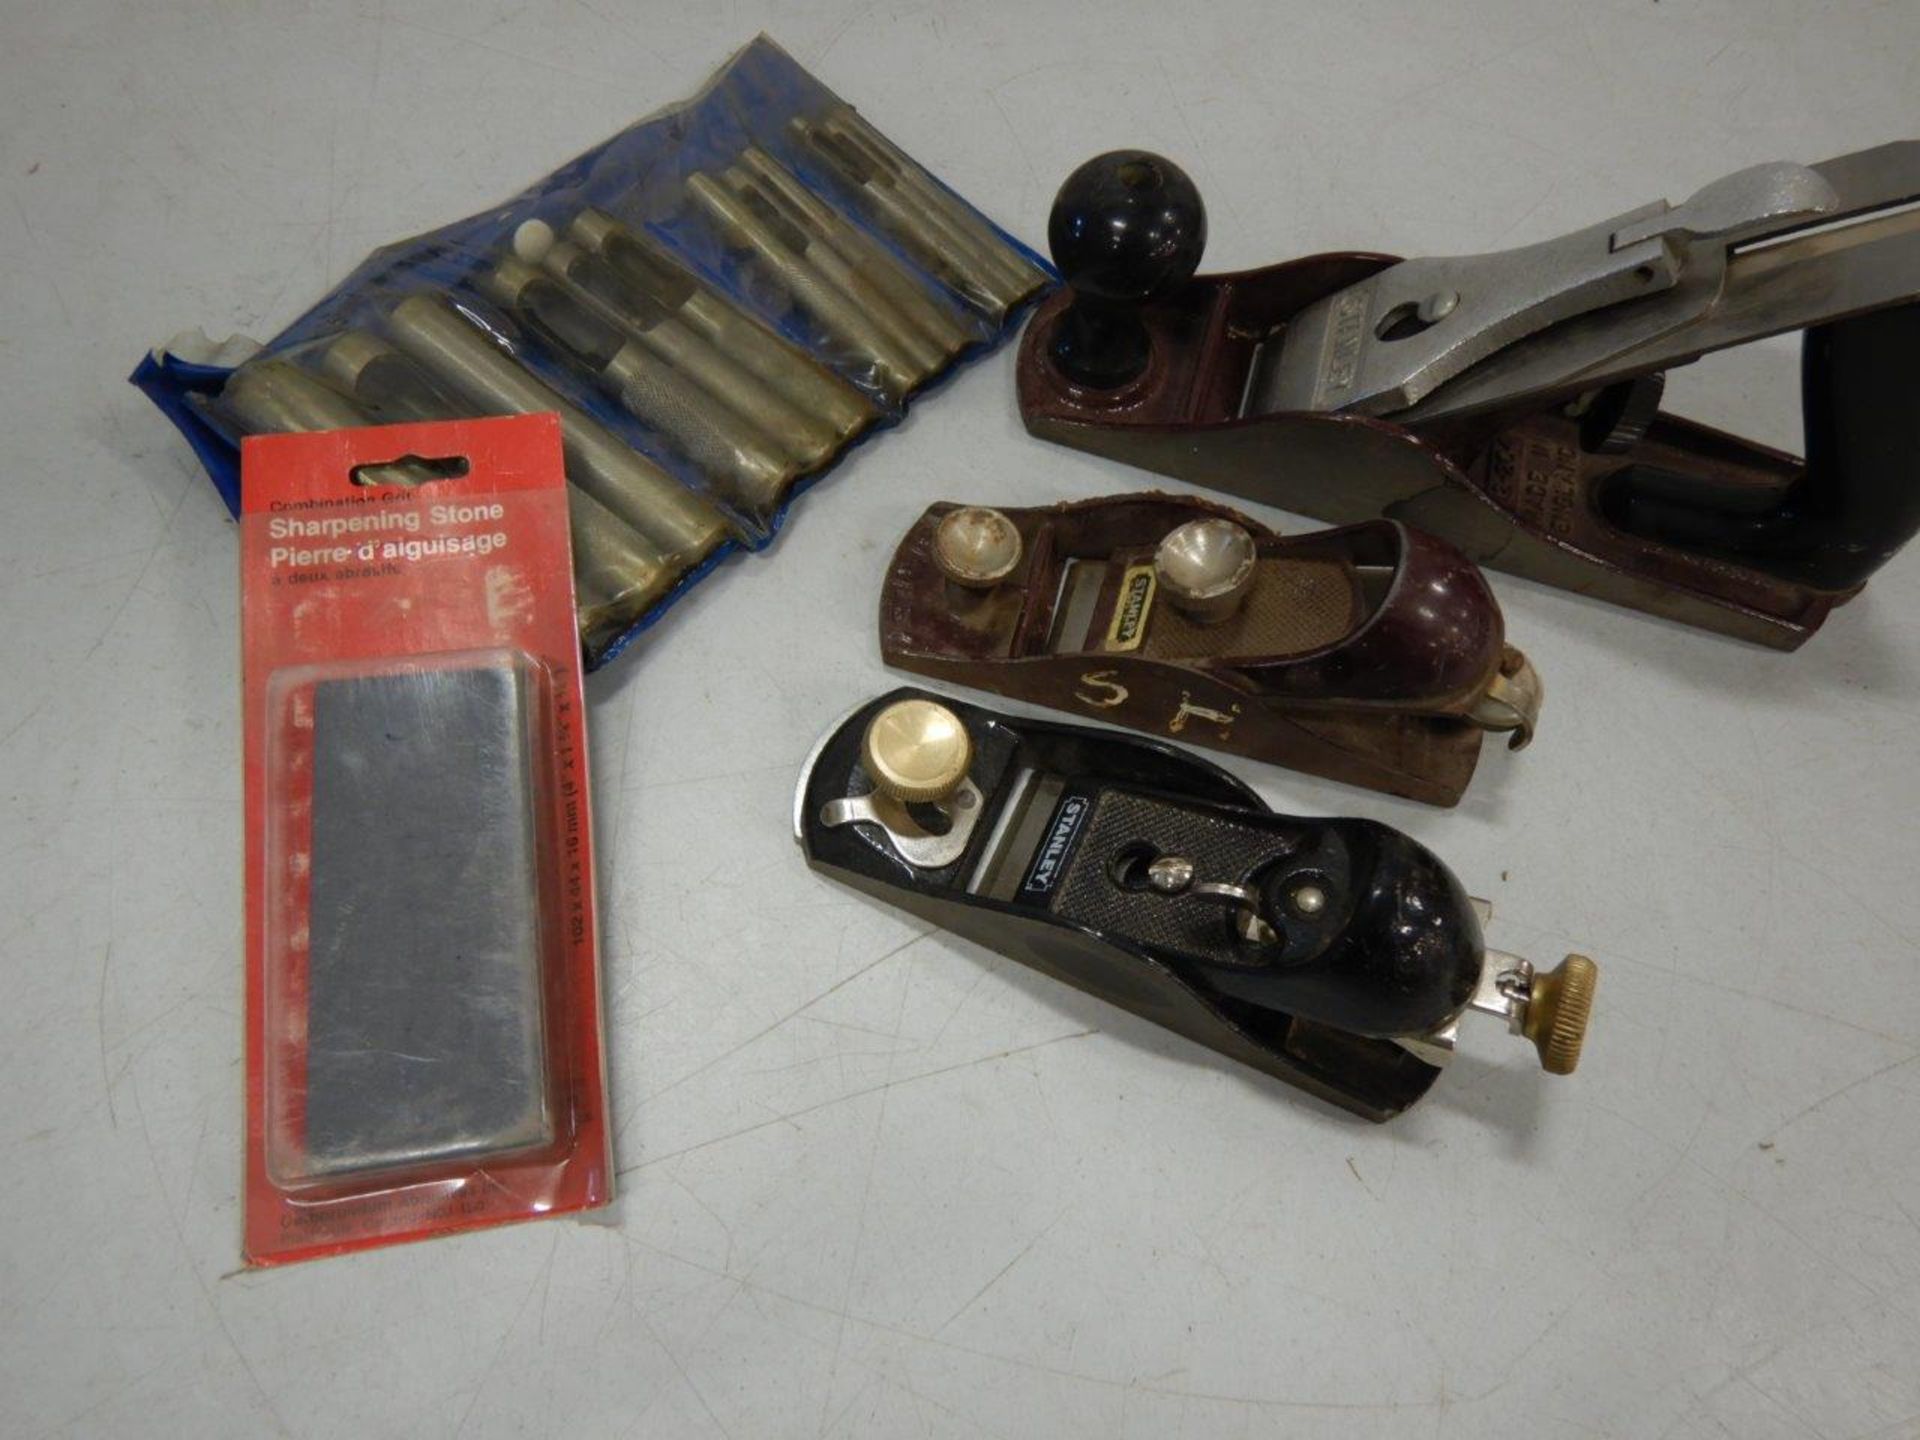 2-STANLEY BLOCK PLANES, 1-JACK PLANE, SHARPENING STONE, AND PUNCH SET